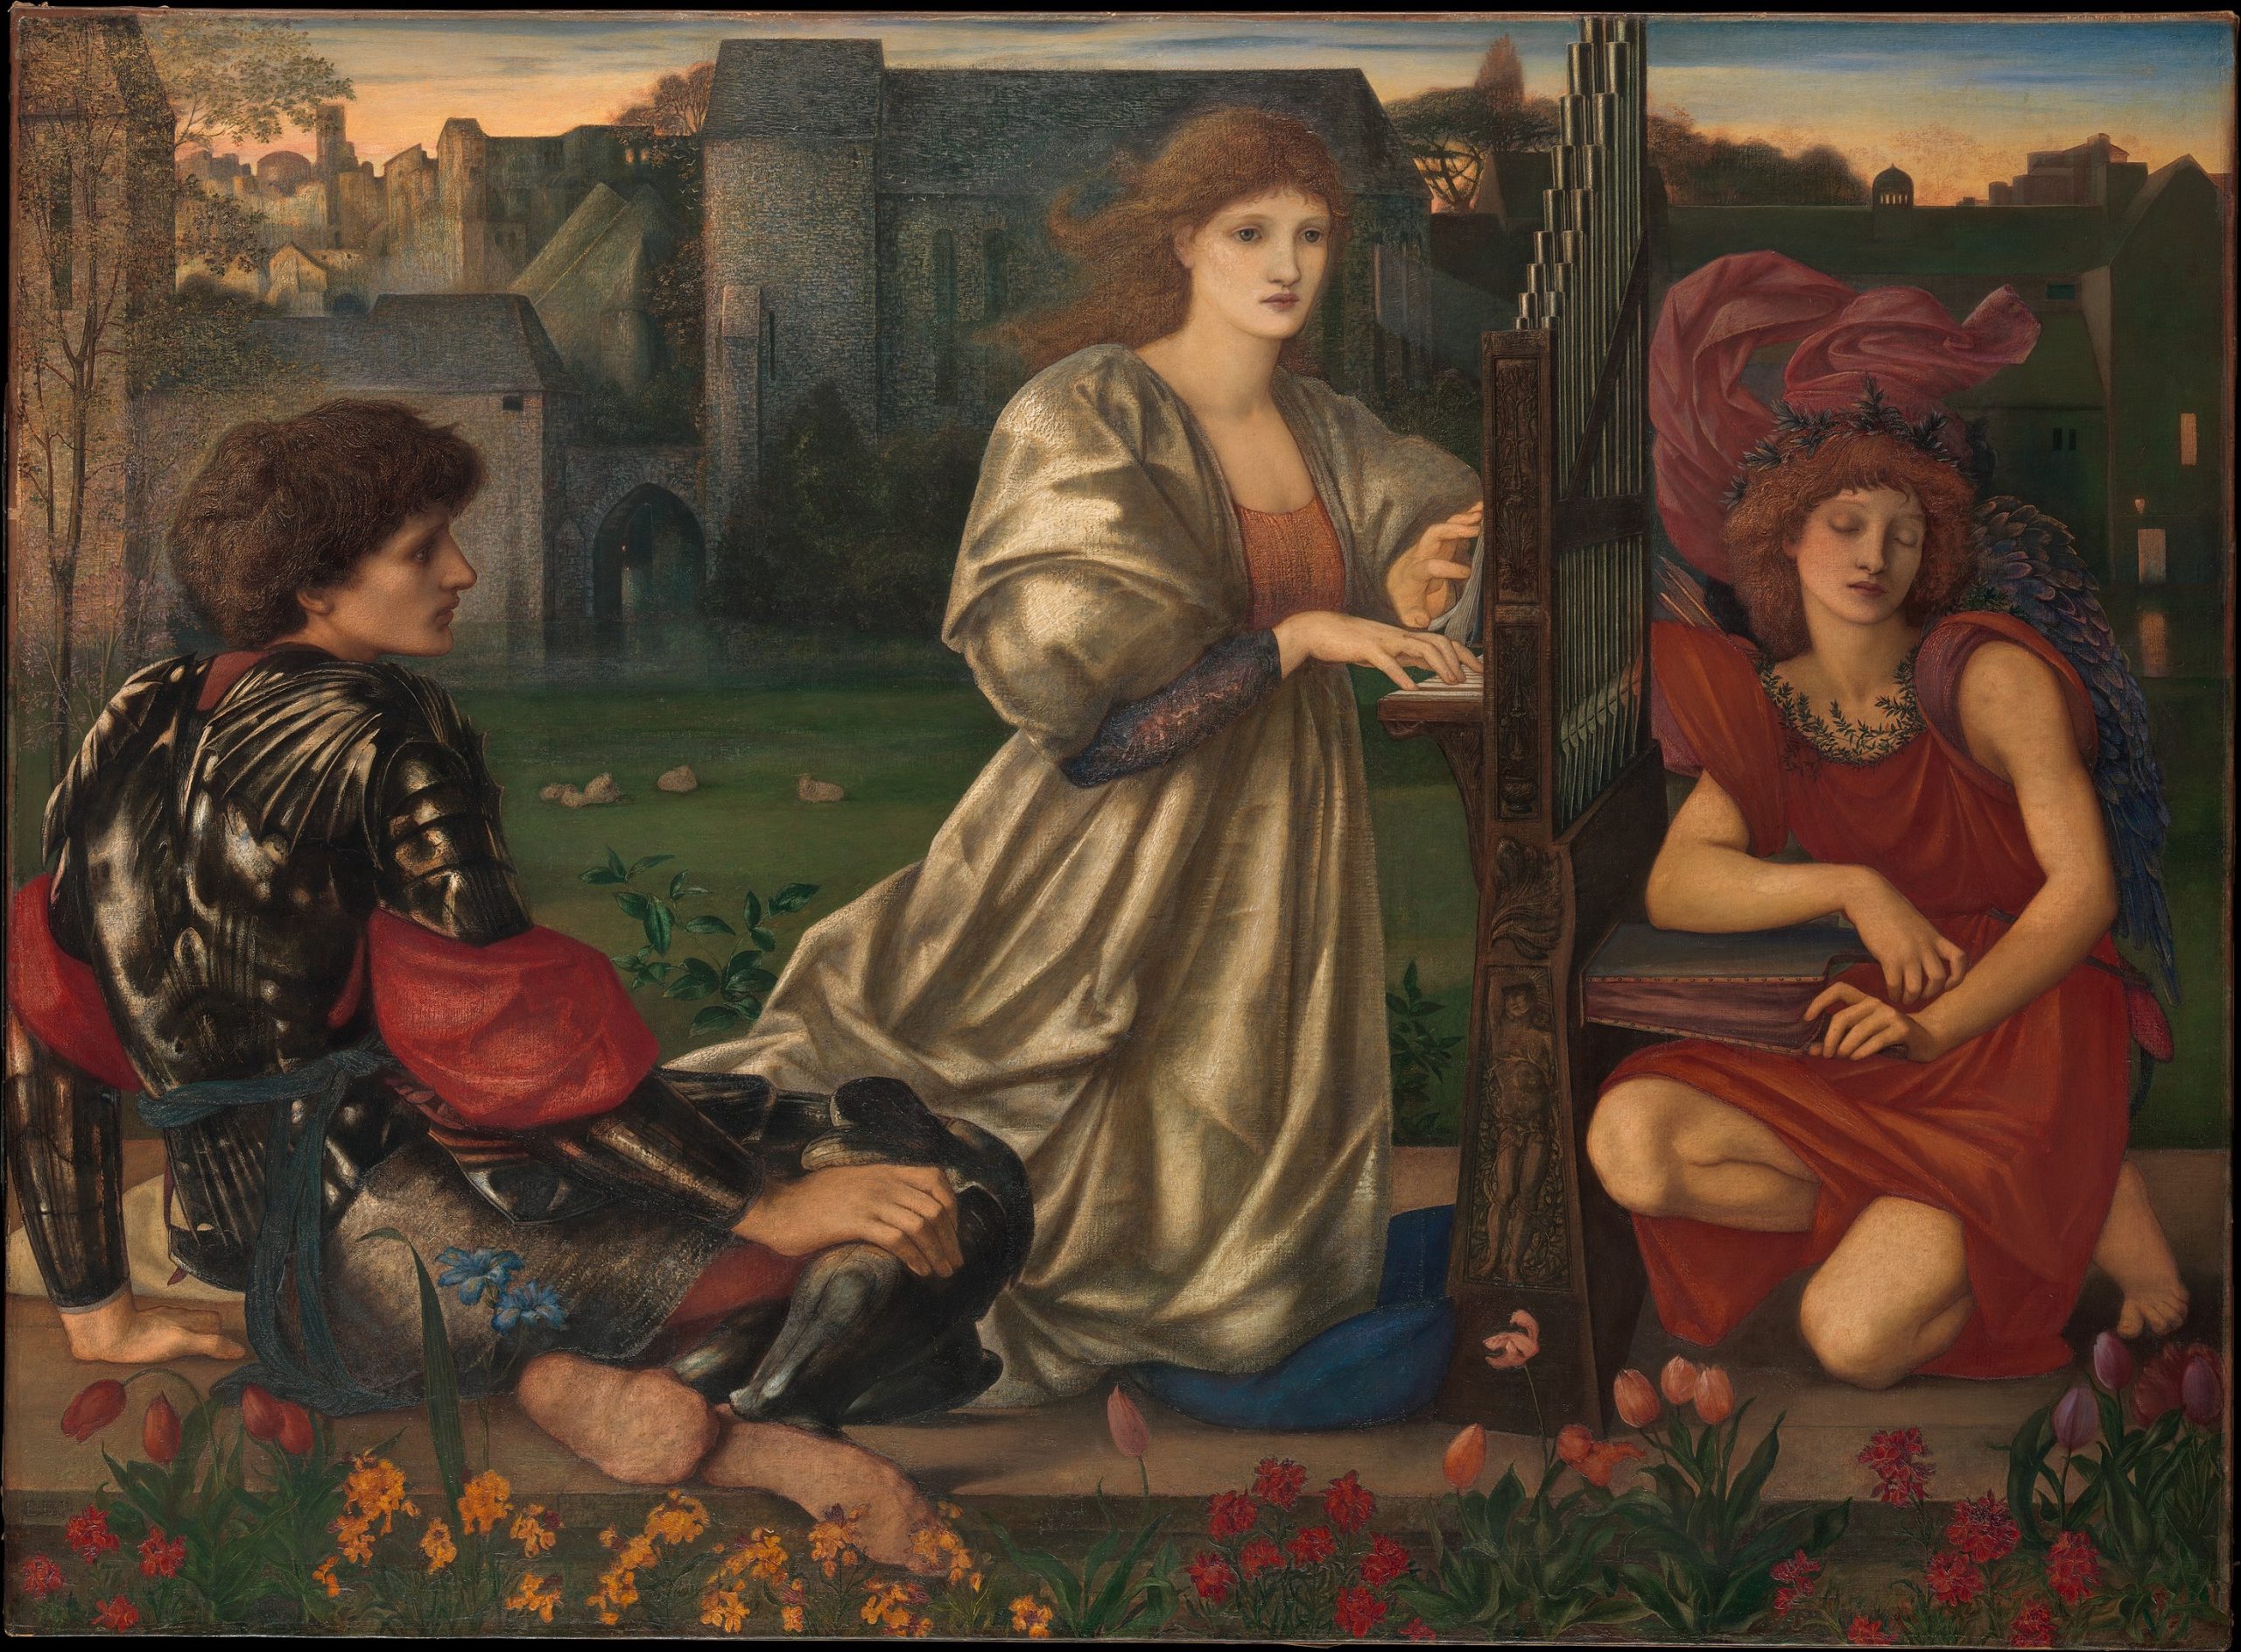 A woman playing an instrument with two listeners at her side in a garden